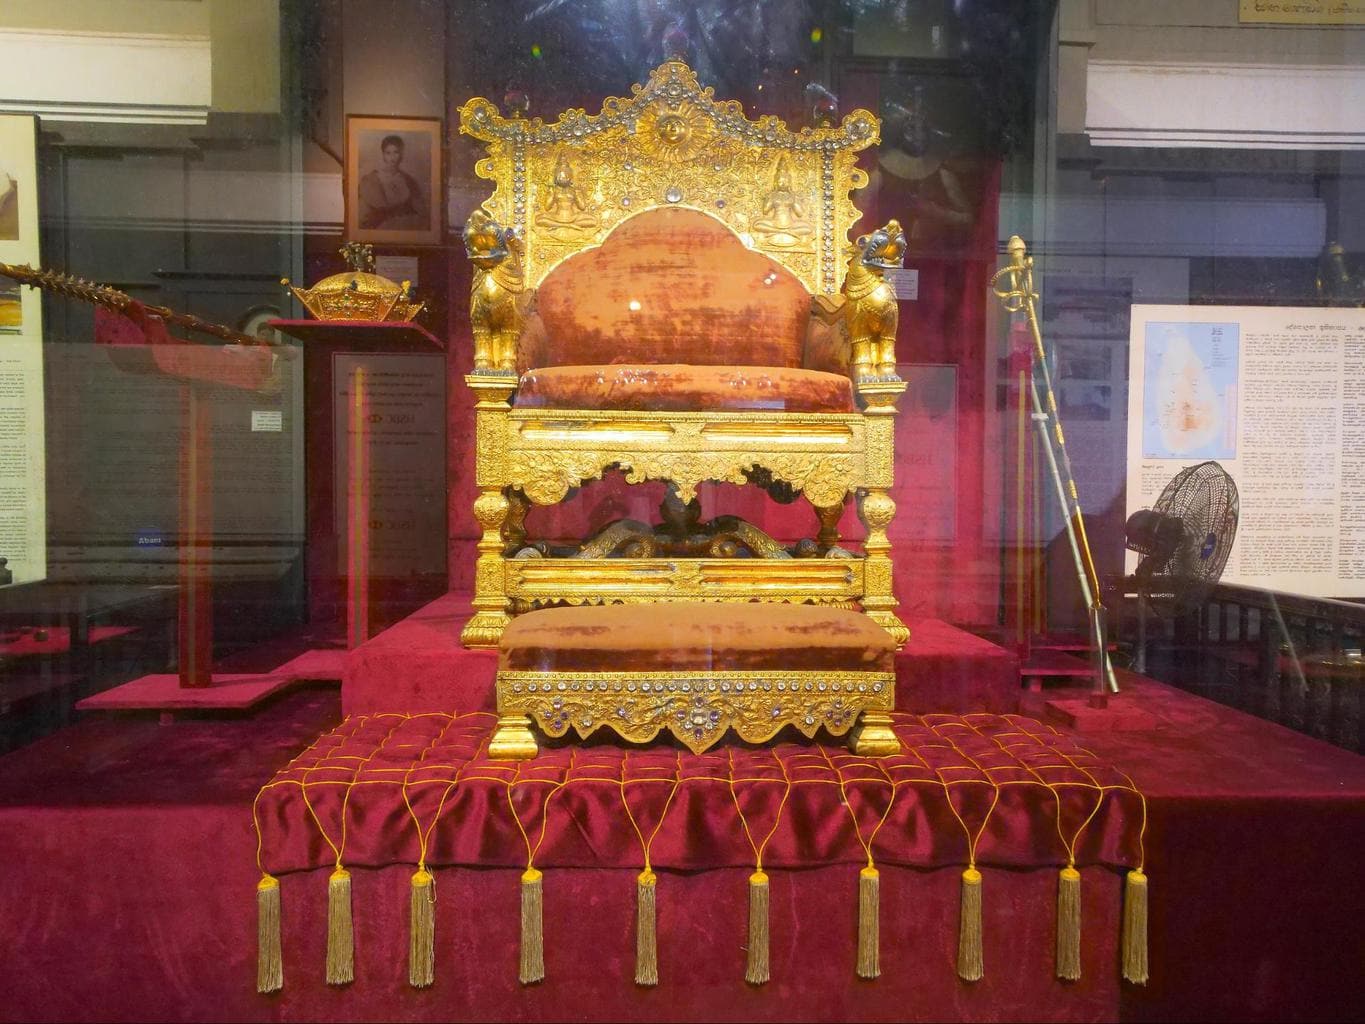 King’s throne